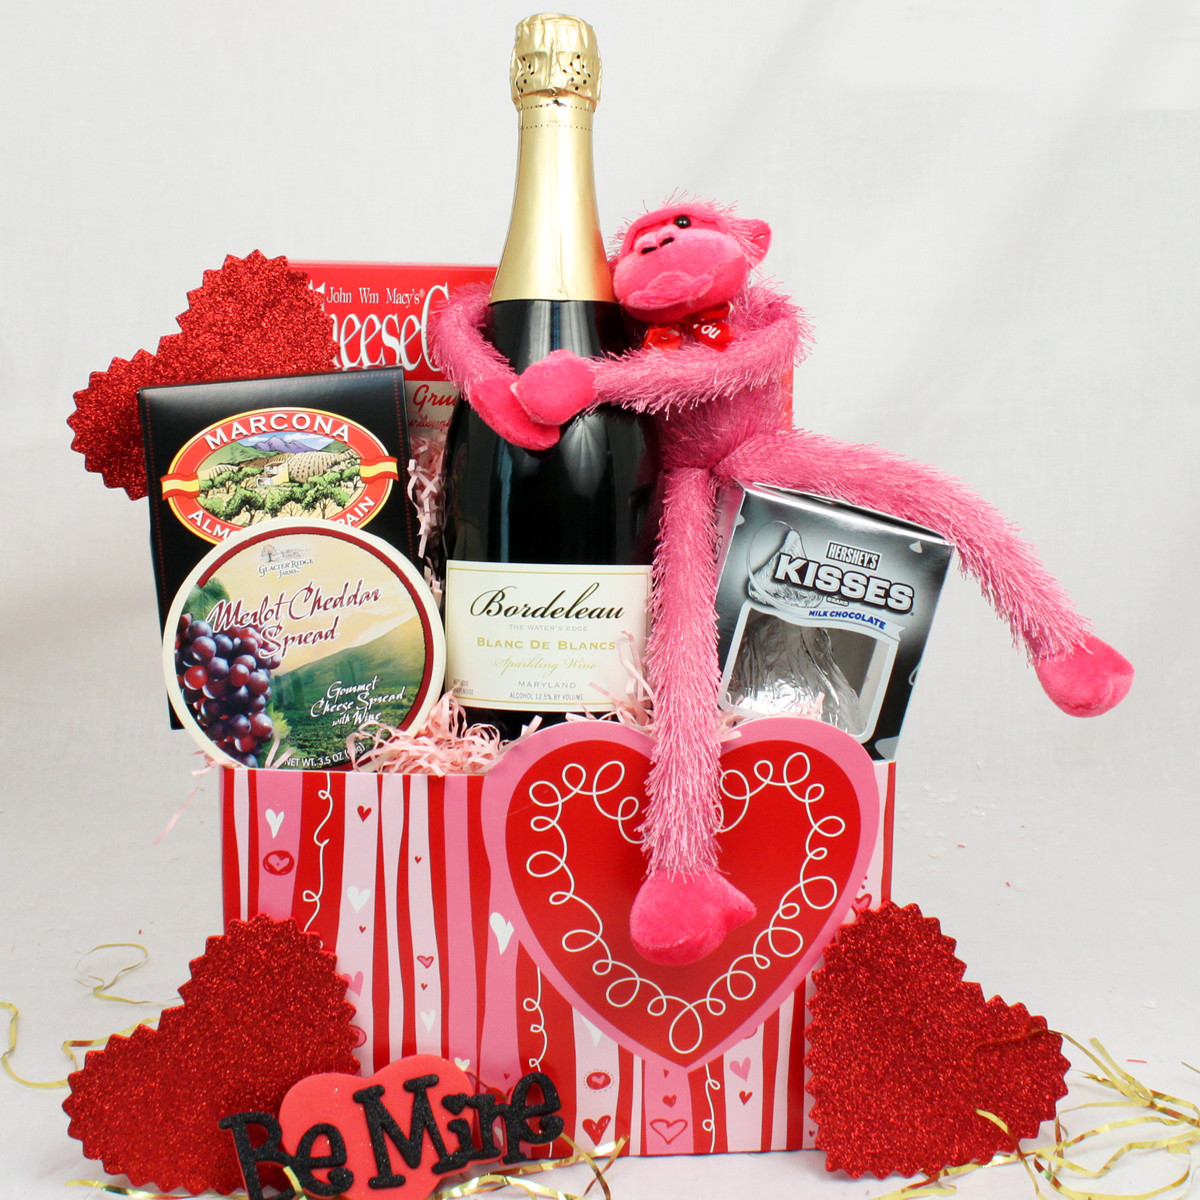 Valentines Day Ideas Gift
 Creative and Thoughtful Valentine’s Day Gifts for Her